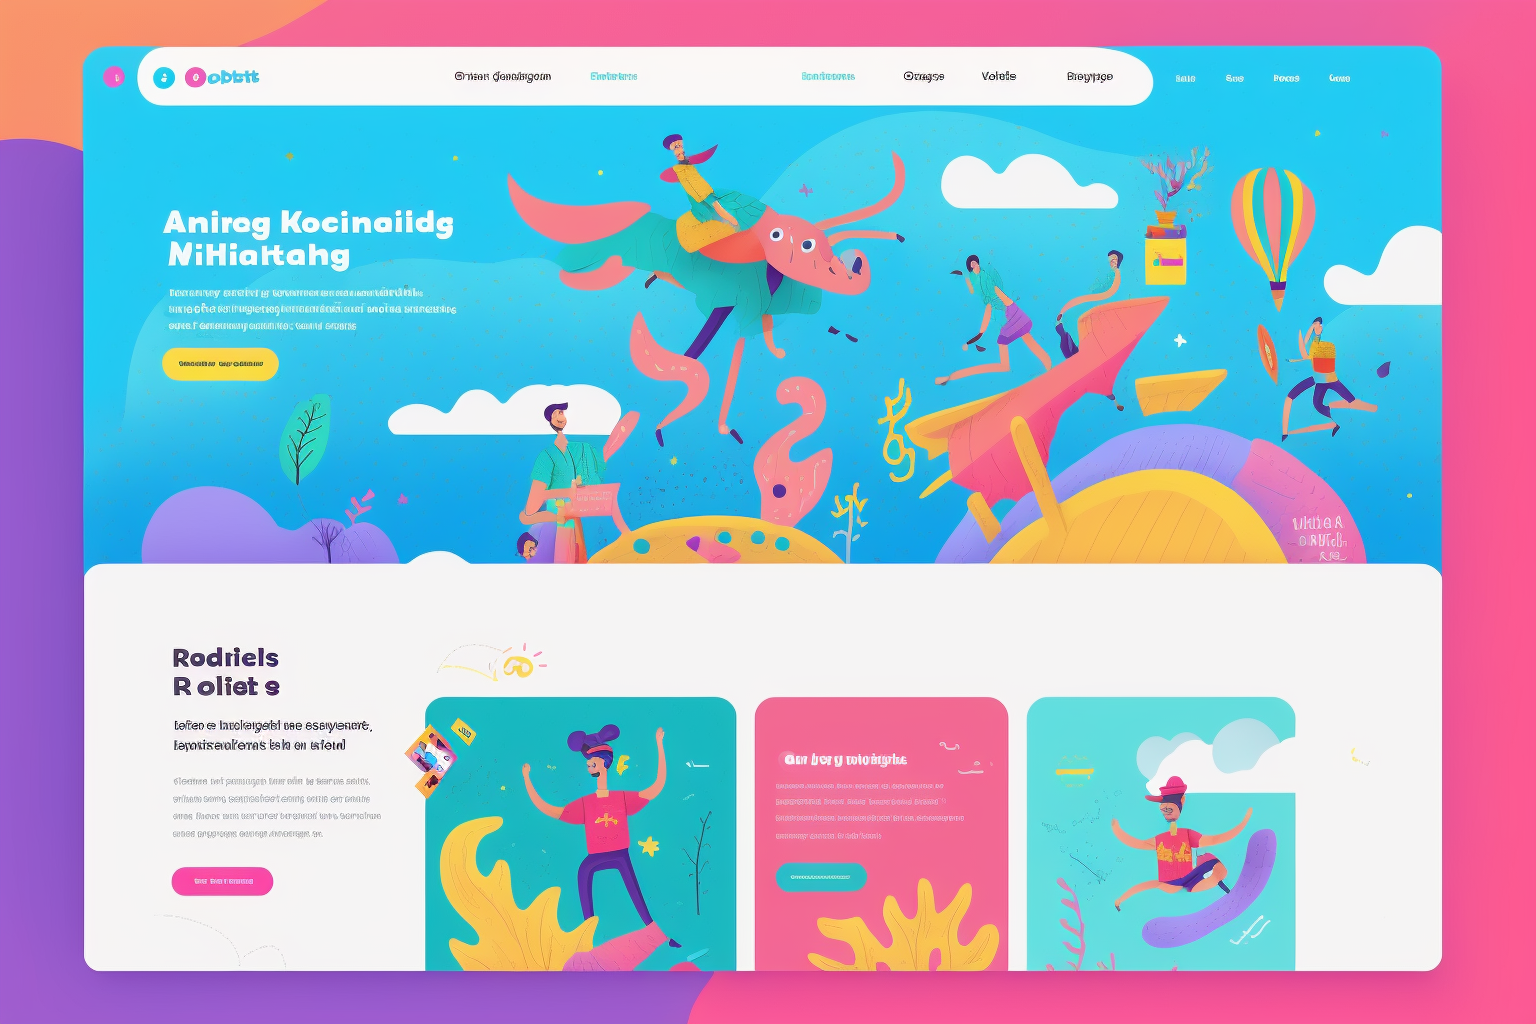 Colourful example informational website